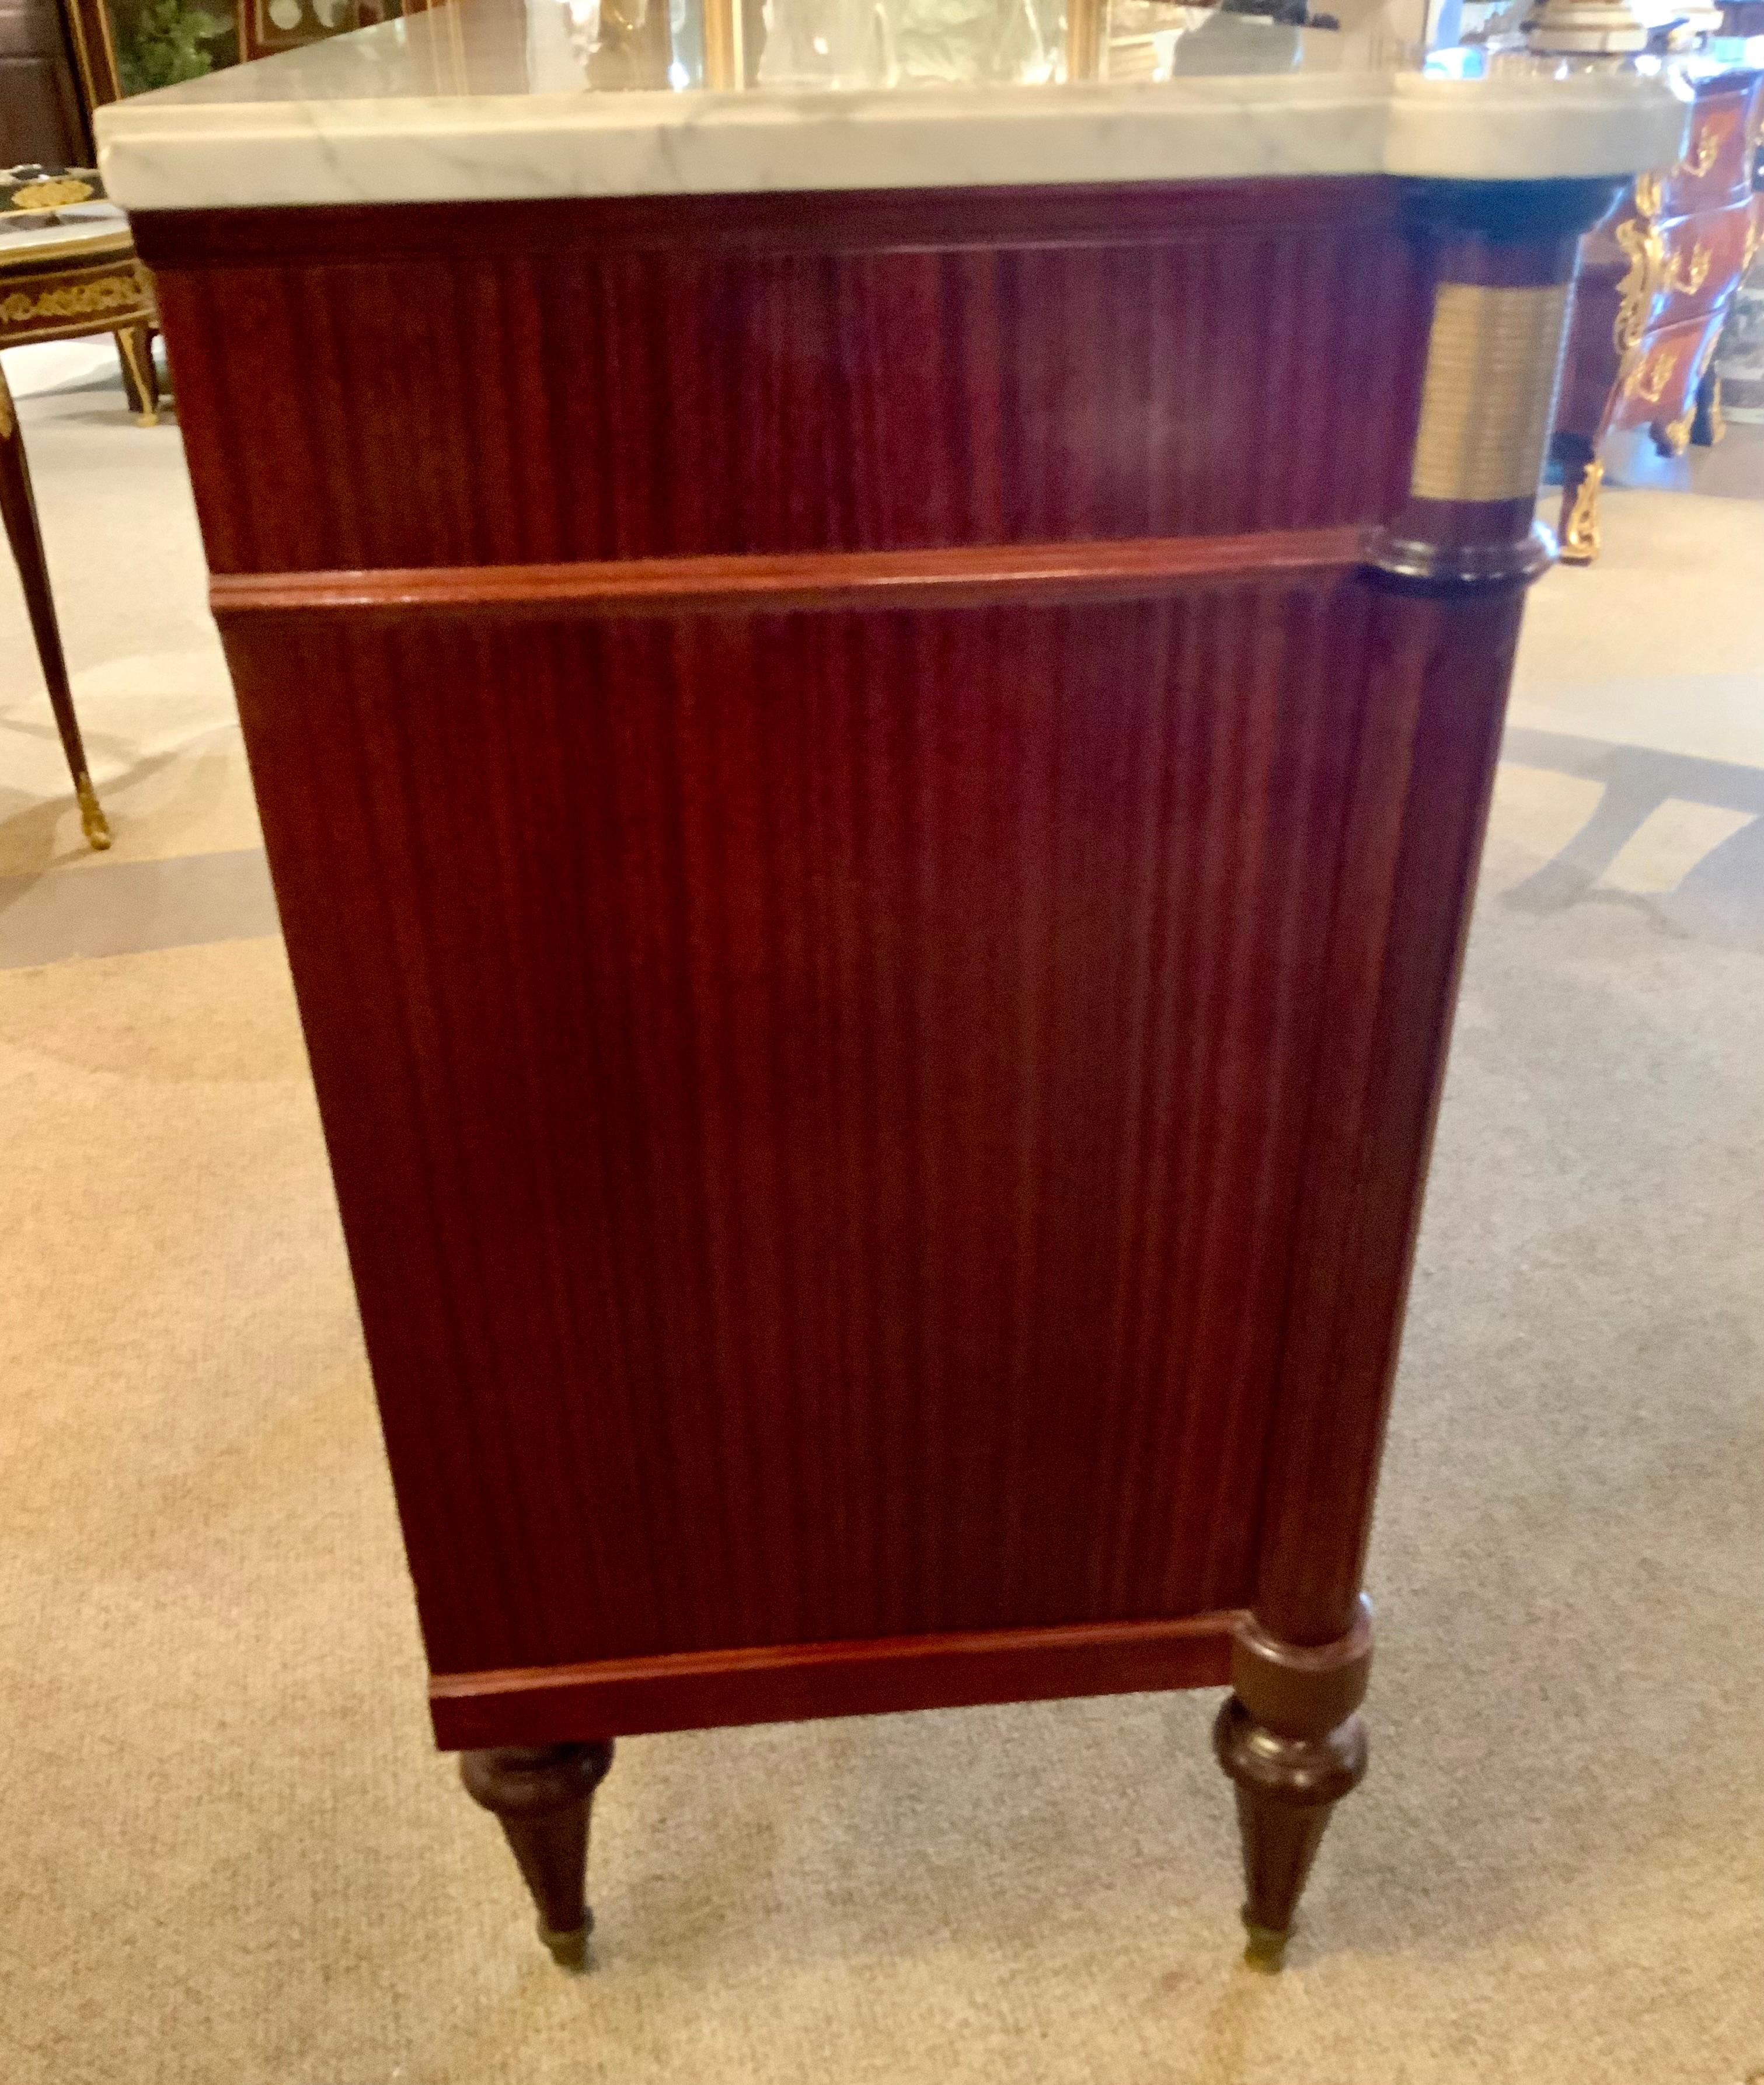 The flame mahogany used in this piece is exceptionally good
The craftsmanship in the cabinetry is extremely fine.
The hardware is a beautiful soft hue in bronze and the
Locks and keys are present and all work. The three drawers
All slide well and